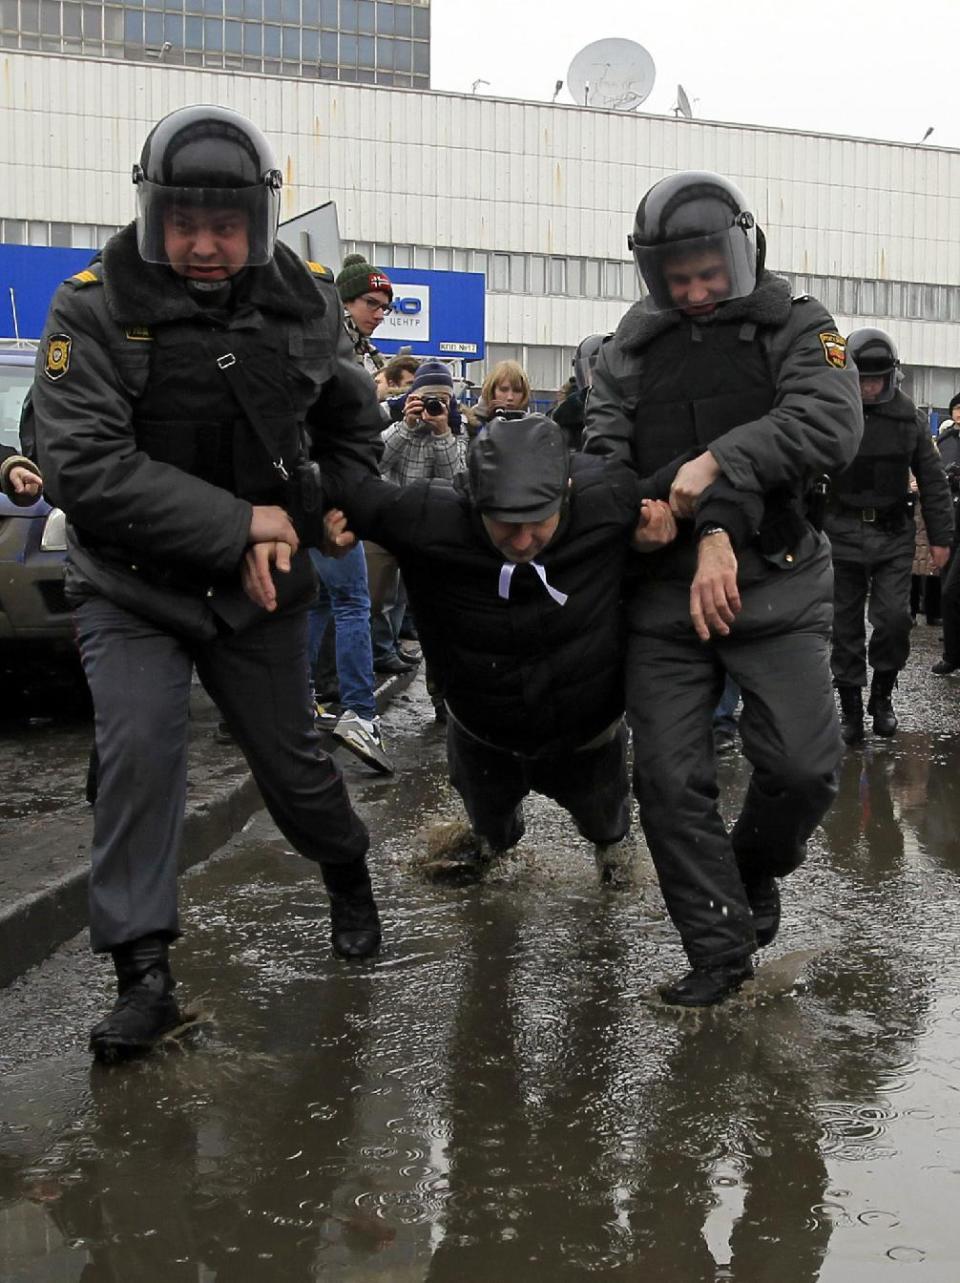 In this Sunday, March 18, 2012 photo, police officers detain a protester outside the Kremlin-loyal NTV television station in Moscow. Russian opposition and human rights groups on Monday, Nov. 19, 2012, urged Western consumer products giants to stop "financing politically motivated persecution" by advertising on a Kremlin-friendly TV network known for its biased coverage of government critics and demonstrations against President Vladimir Putin. In the wake of unprecedented anti-Putin protests that followed last December's rigged parliament vote and Putin's return to the Kremlin in May, NTV has run dozens of news reports, talk shows and pseudo-documentaries accusing opposition leaders of plotting coups and terrorist attacks, of receiving money from Western governments, and of hiring migrant workers and neo-Nazis to participate in anti-Putin rallies. (AP Photo/Sergey Ponomarev)